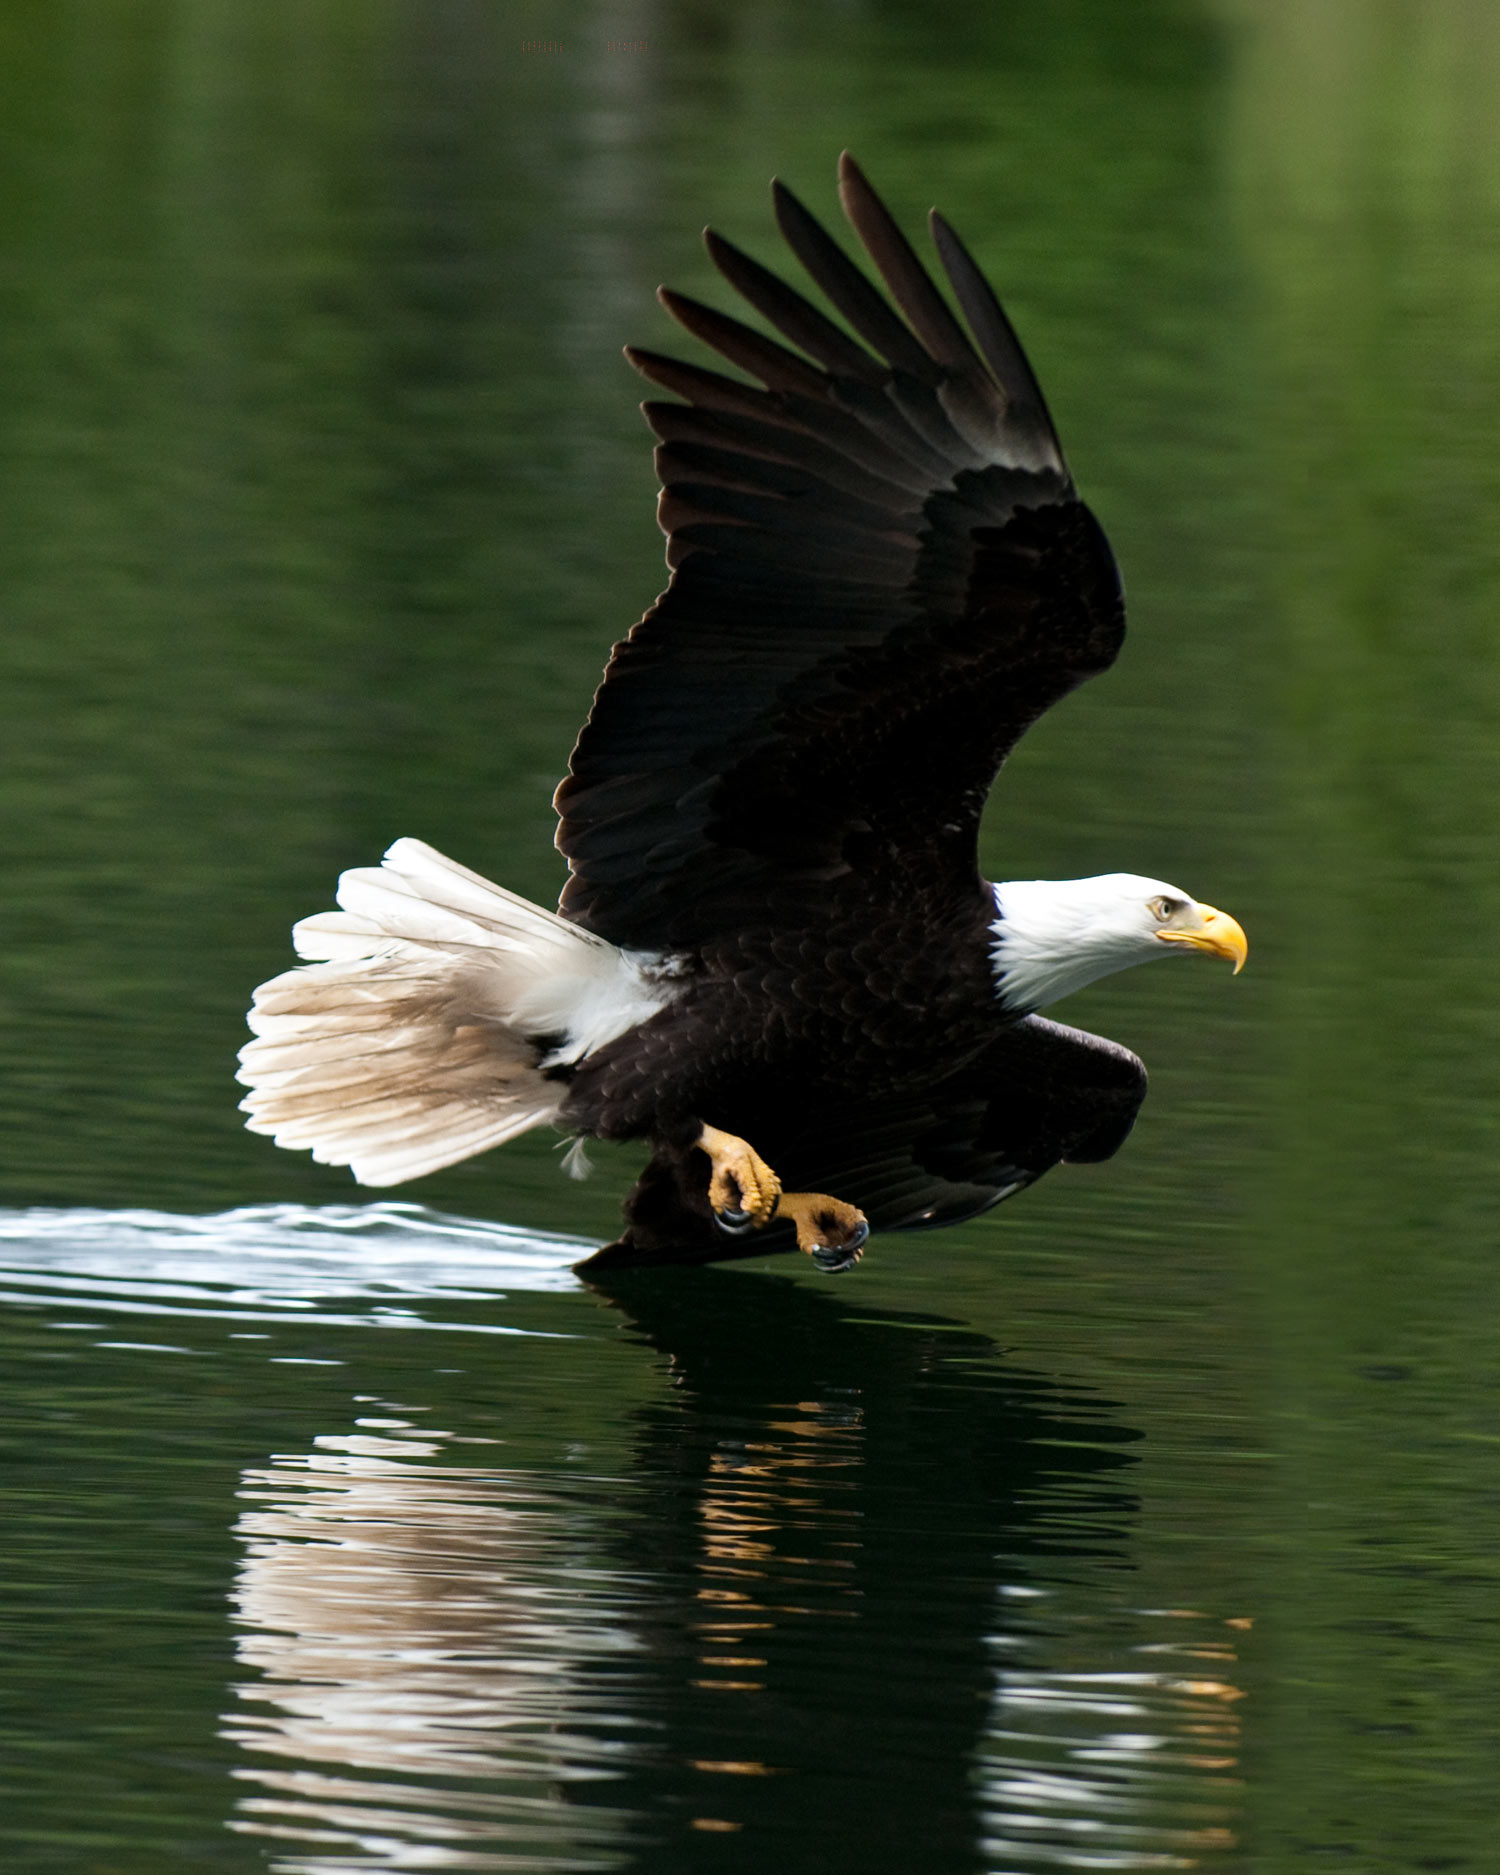 Eagle flying over water.